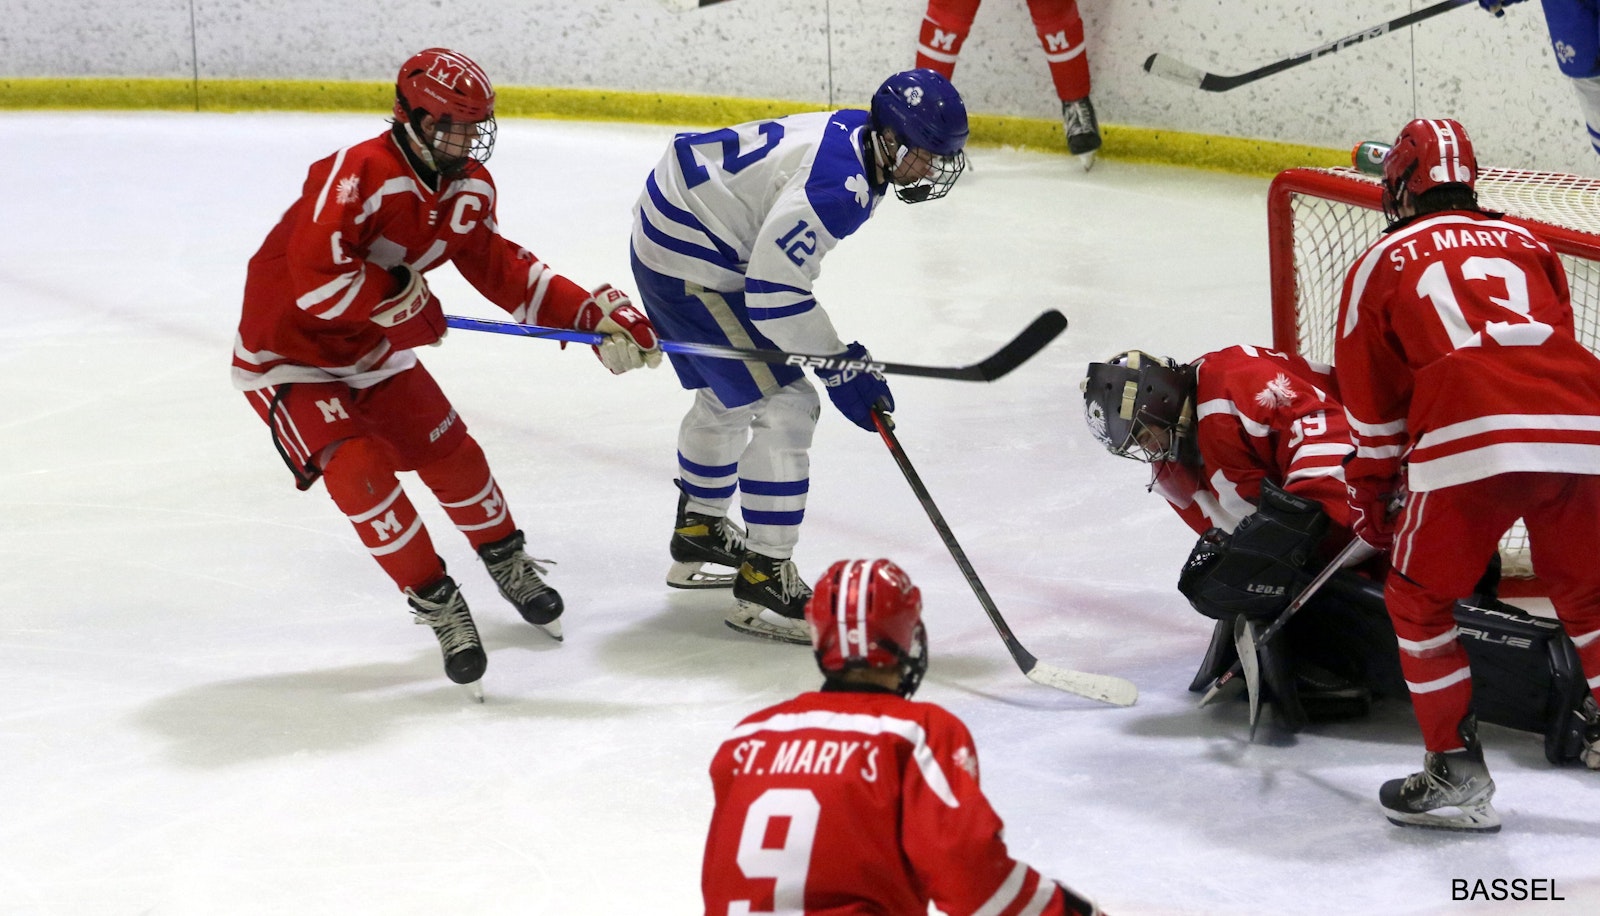 St. Mary’s junior goaltender Will Keane was successful in blocking this shot by Catholic Central’s senior captain Jackson Walsh. However, seven other pucks by Walsh’s teammates made their way past his best efforts for the Shamrocks’ CHSL Bishop Division championship.